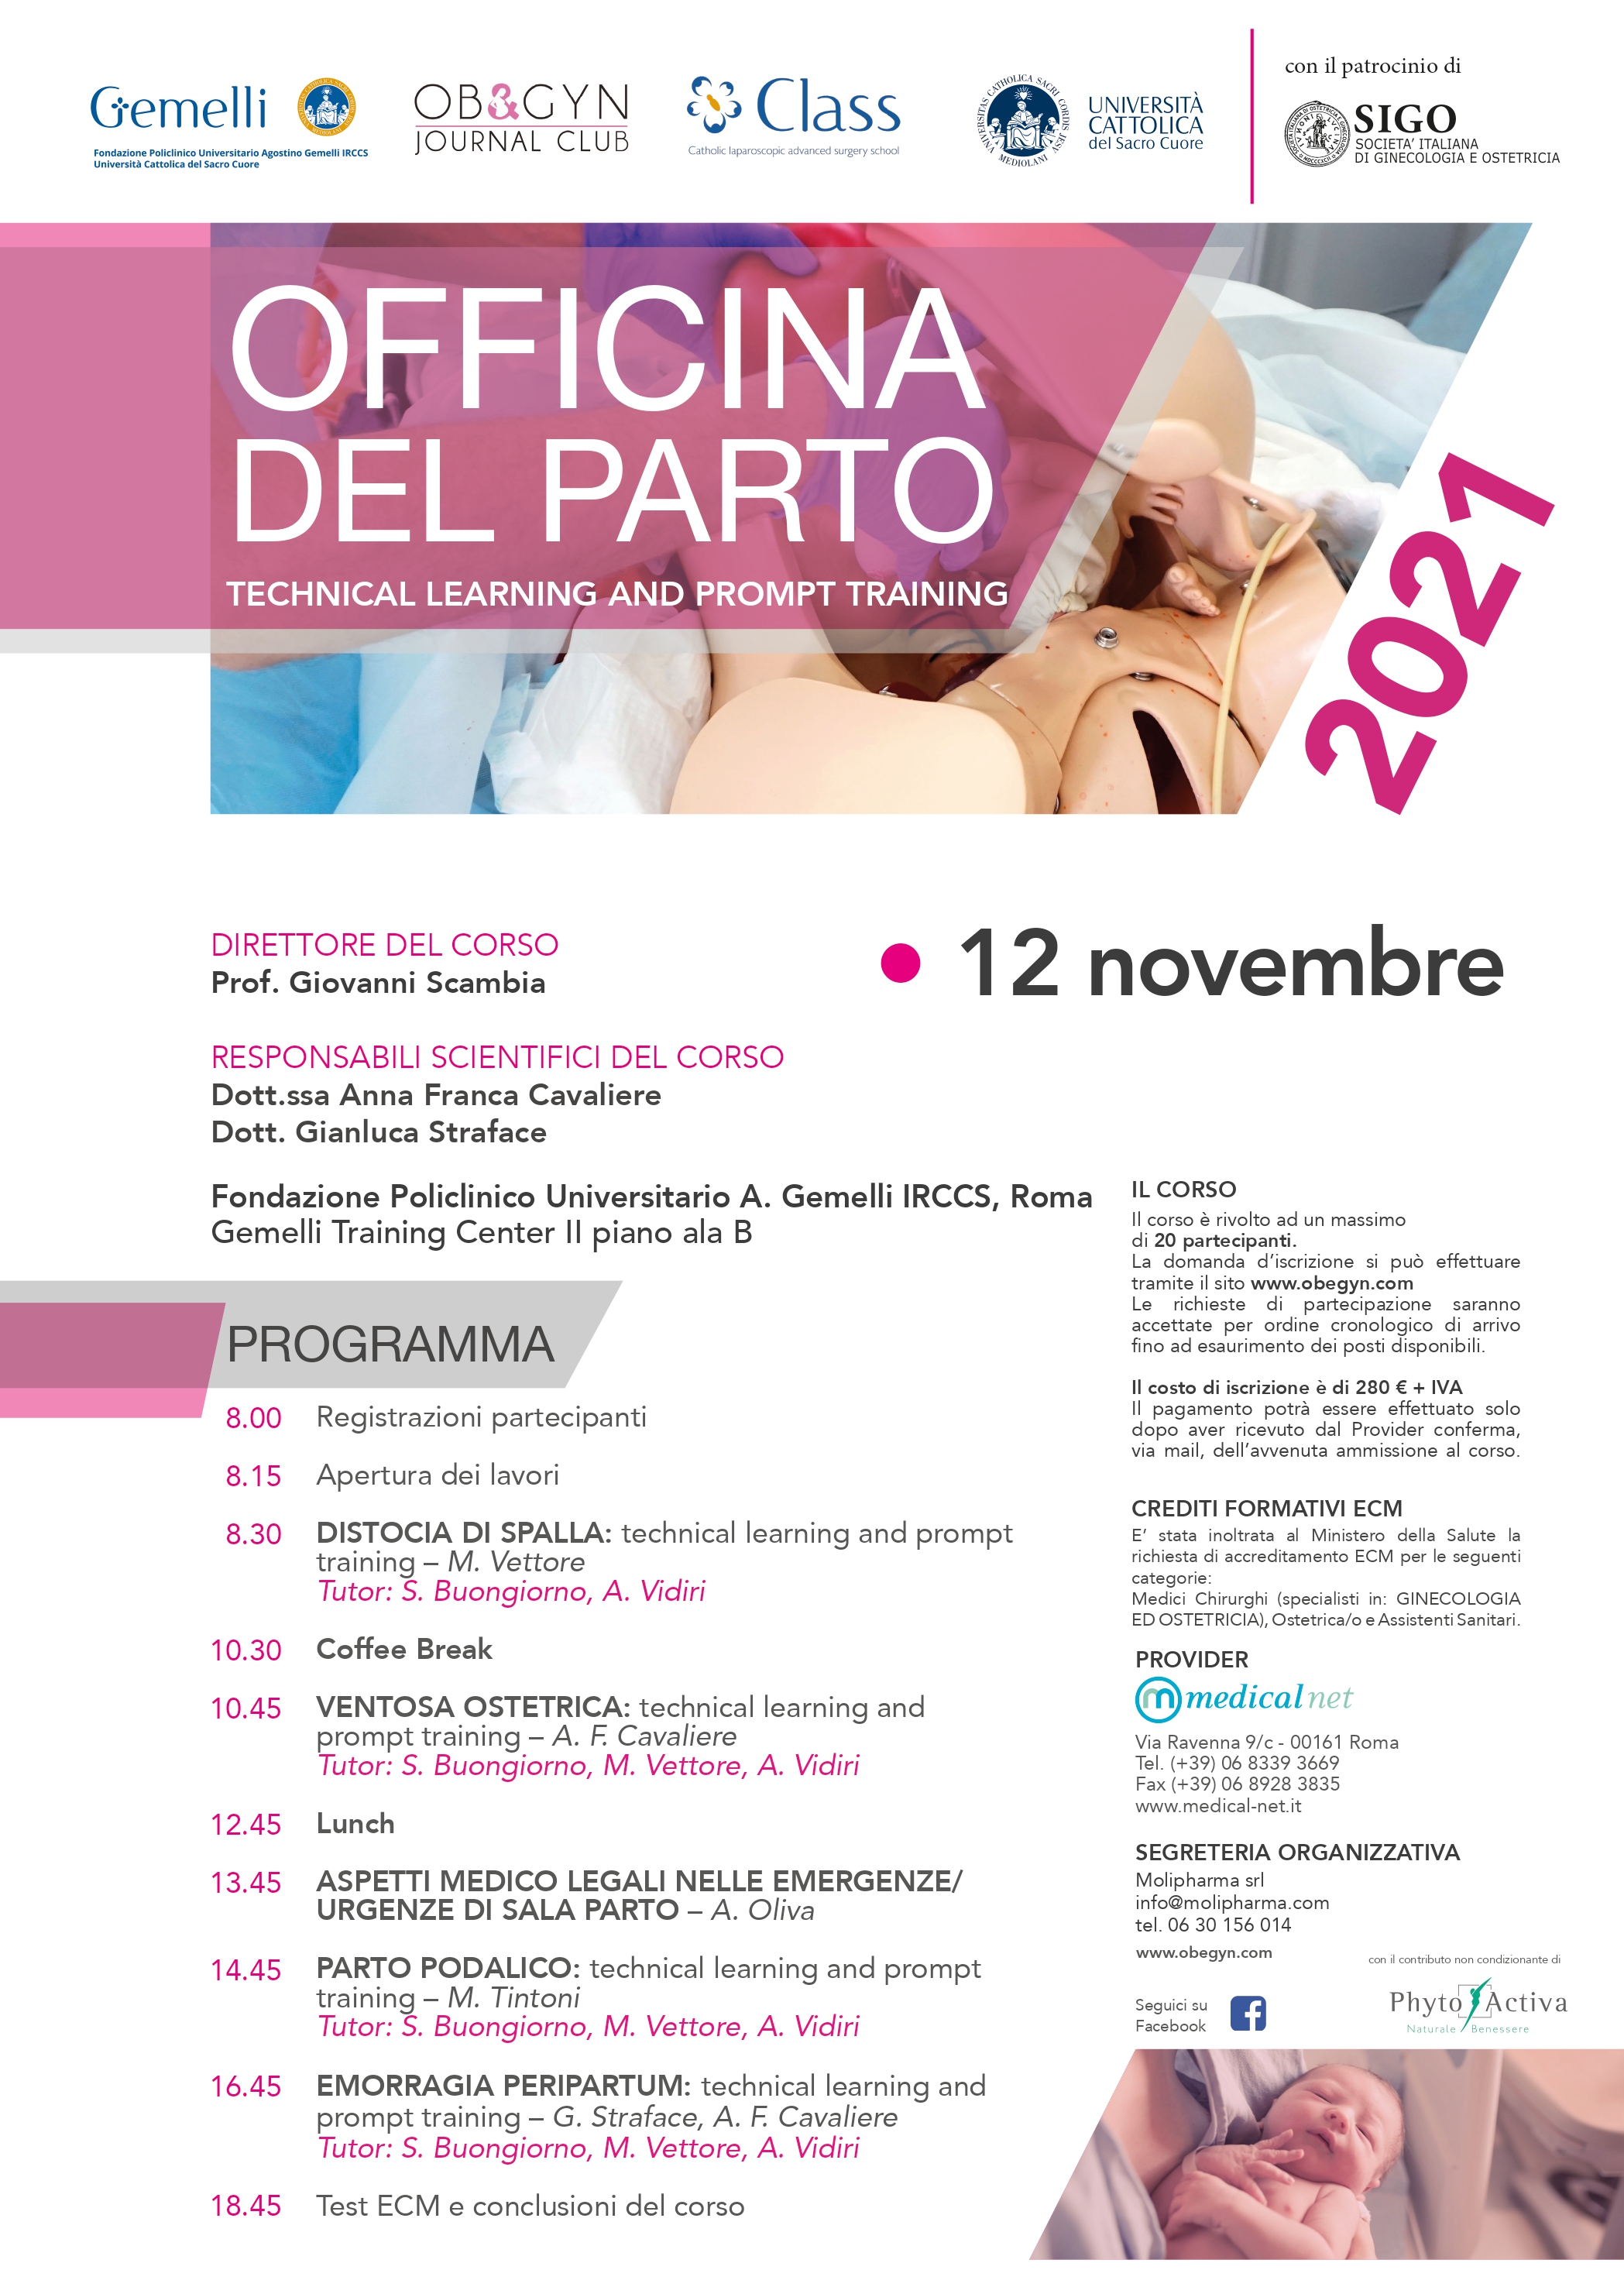 Programma Officina del Parto. Technical Learning and Prompt Training